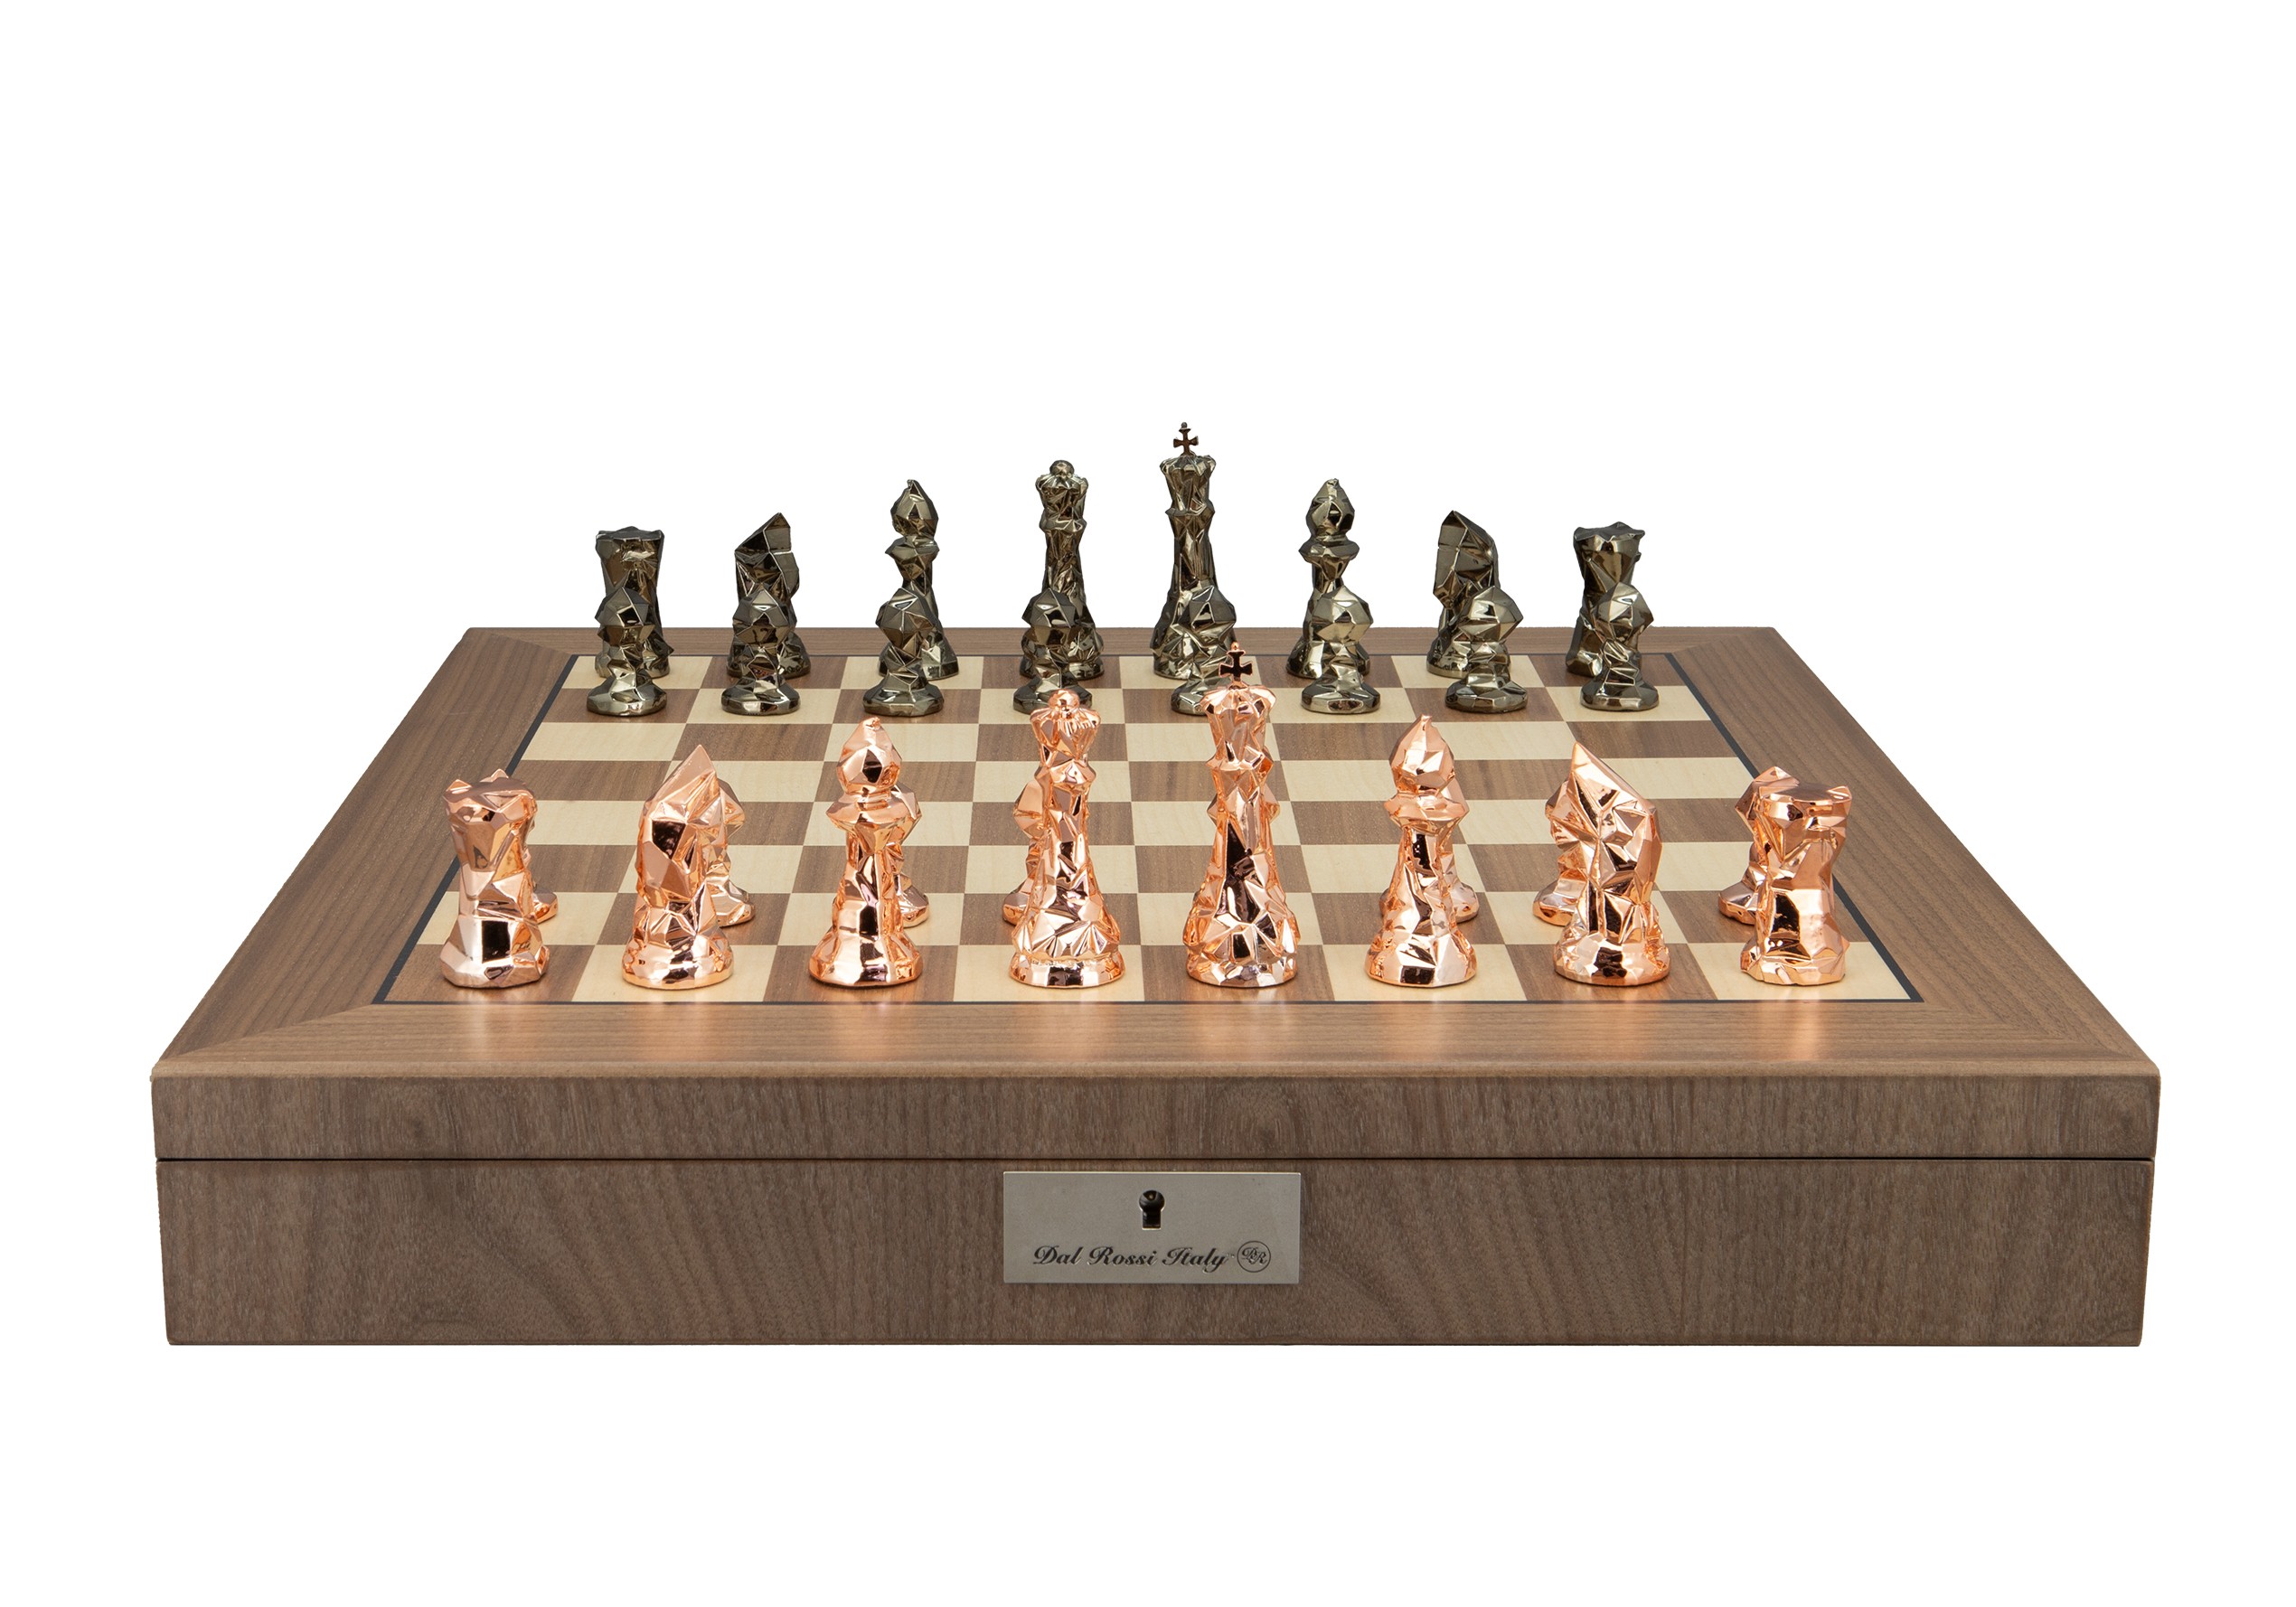 Dal Rossi Diamond-Cut Copper & Bronze Chessmen on a Walnut Inlaid Chess Box with Compartments 20"